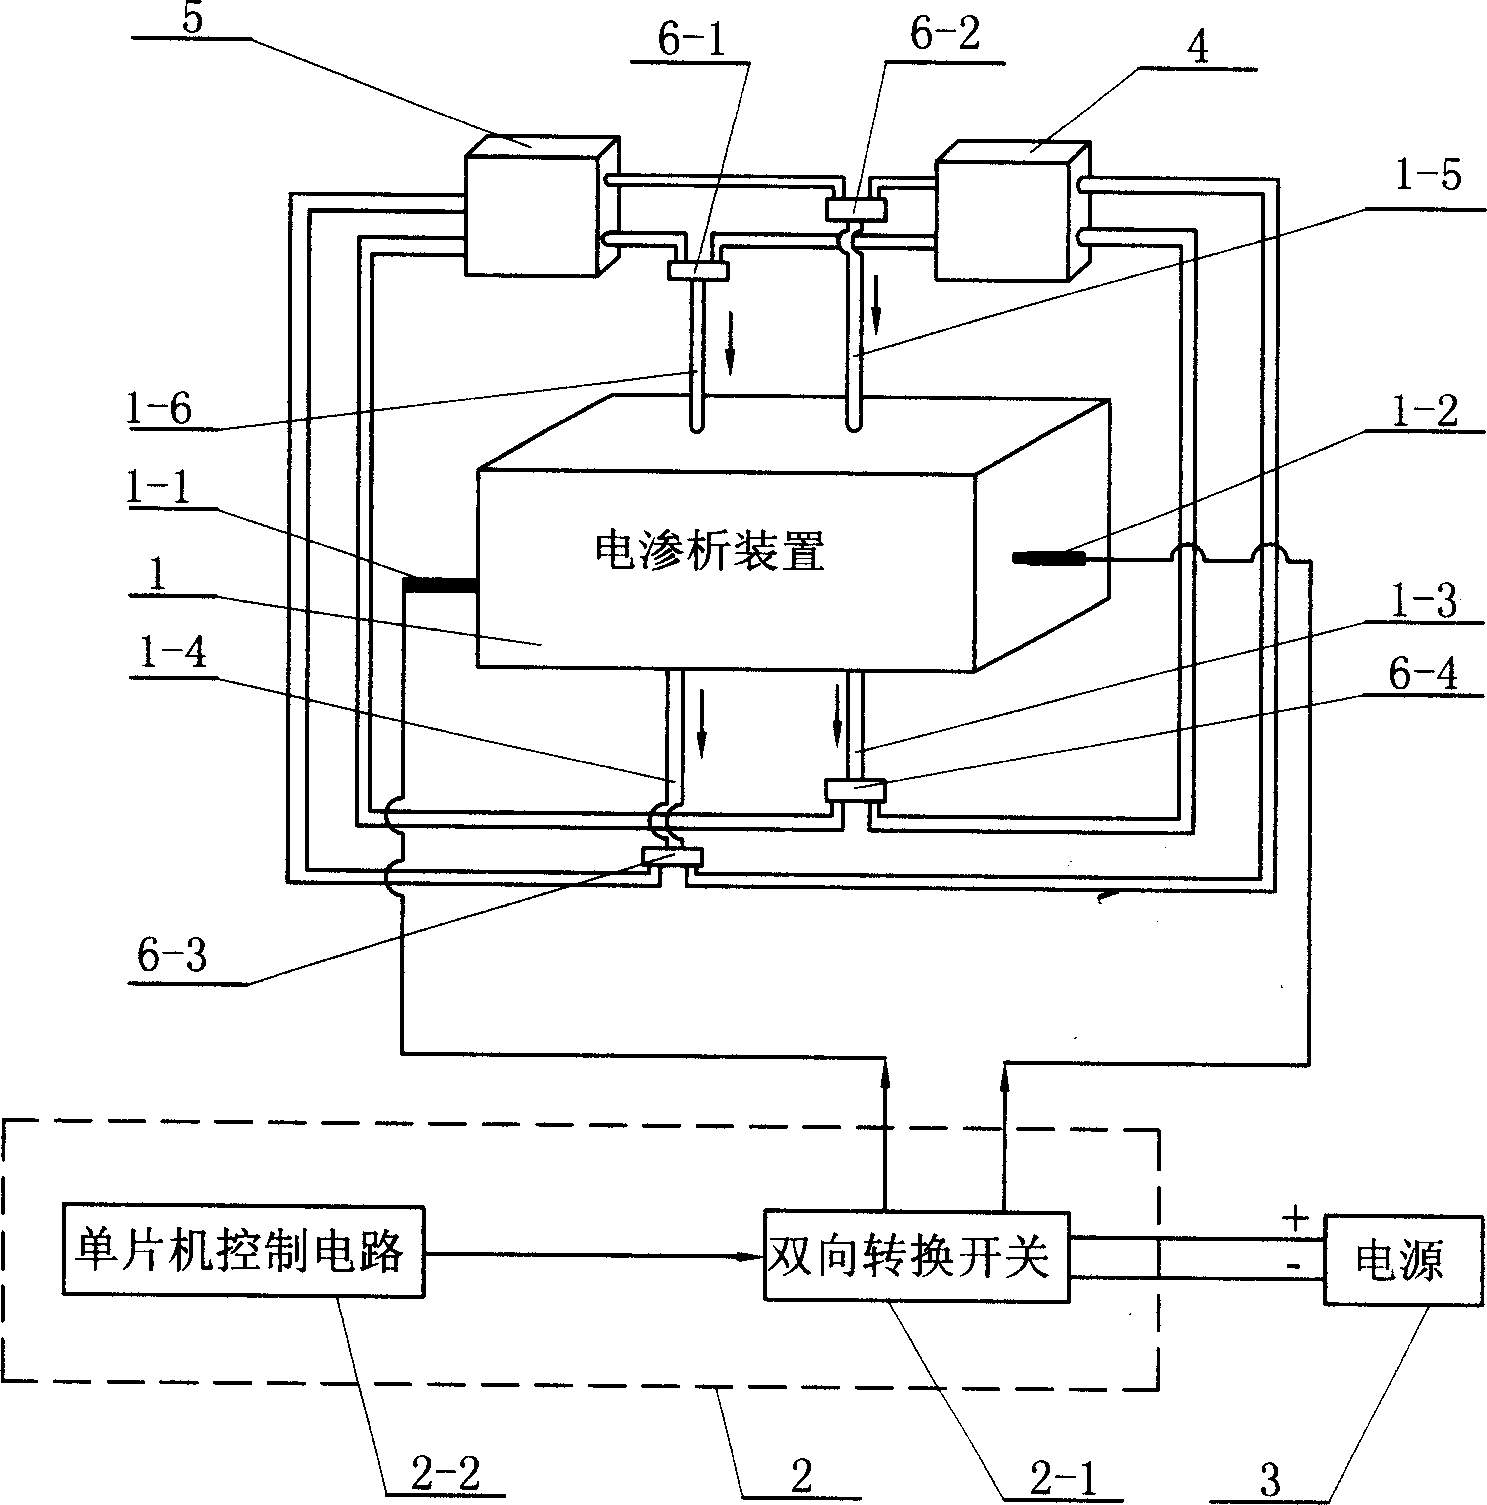 Frequently pole-reversing electroosmosis method for extracting and concentrating sodium lactate from garbage fermentation liquid